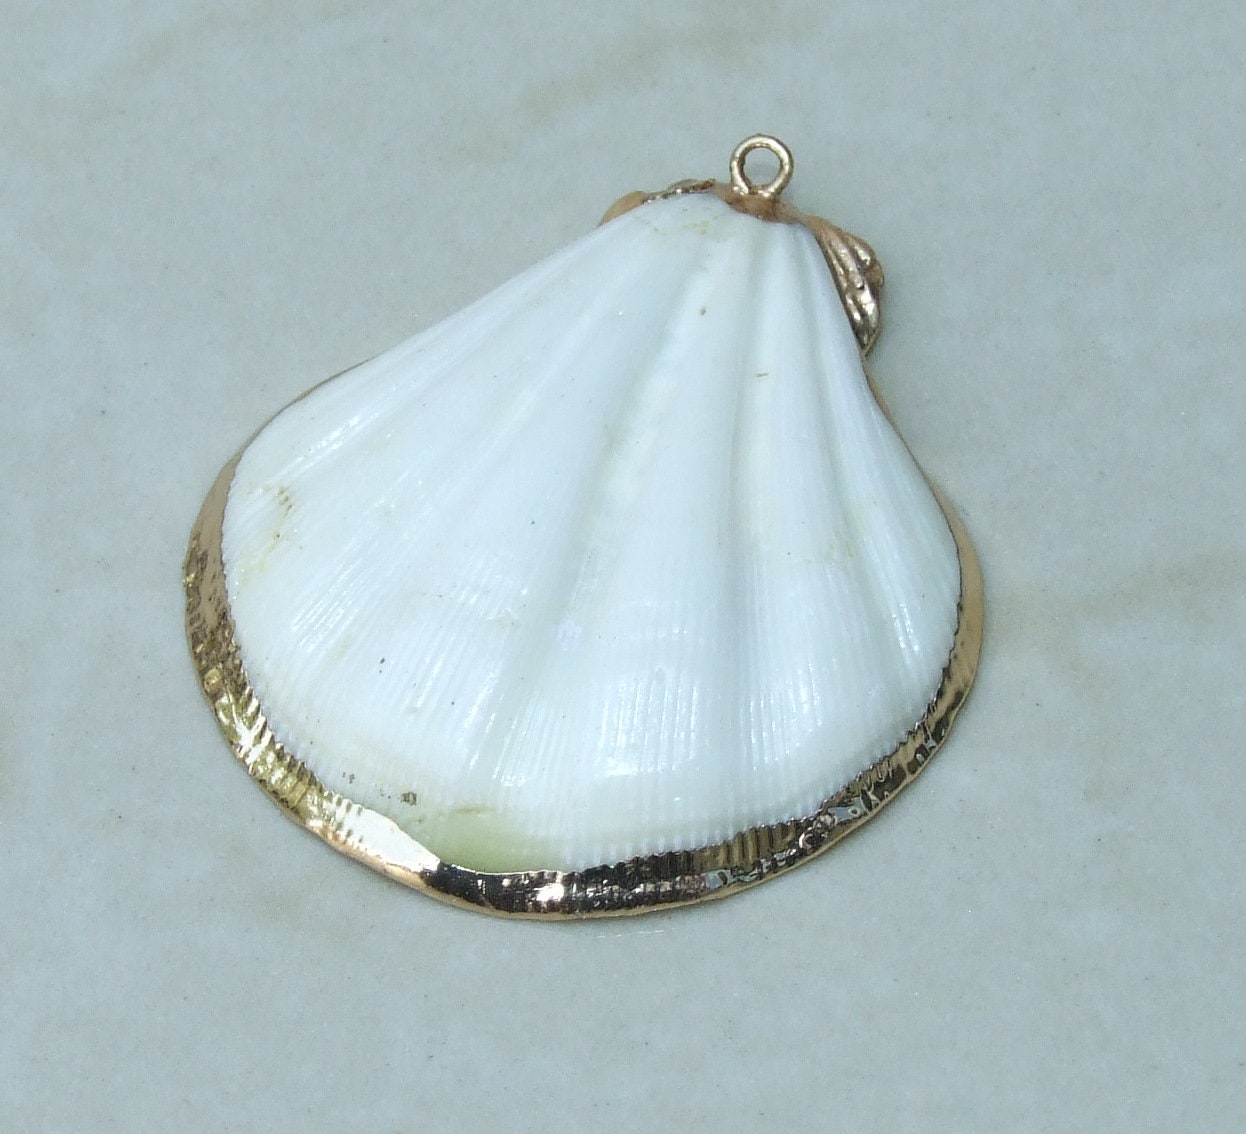 Natural Scallop Shell Pendant, Gold Edge Loop, Natural Seashell, Deep Sea Shell, Shell Necklace, Beach Jewelry, Ocean Seashell, 34-44mm W01